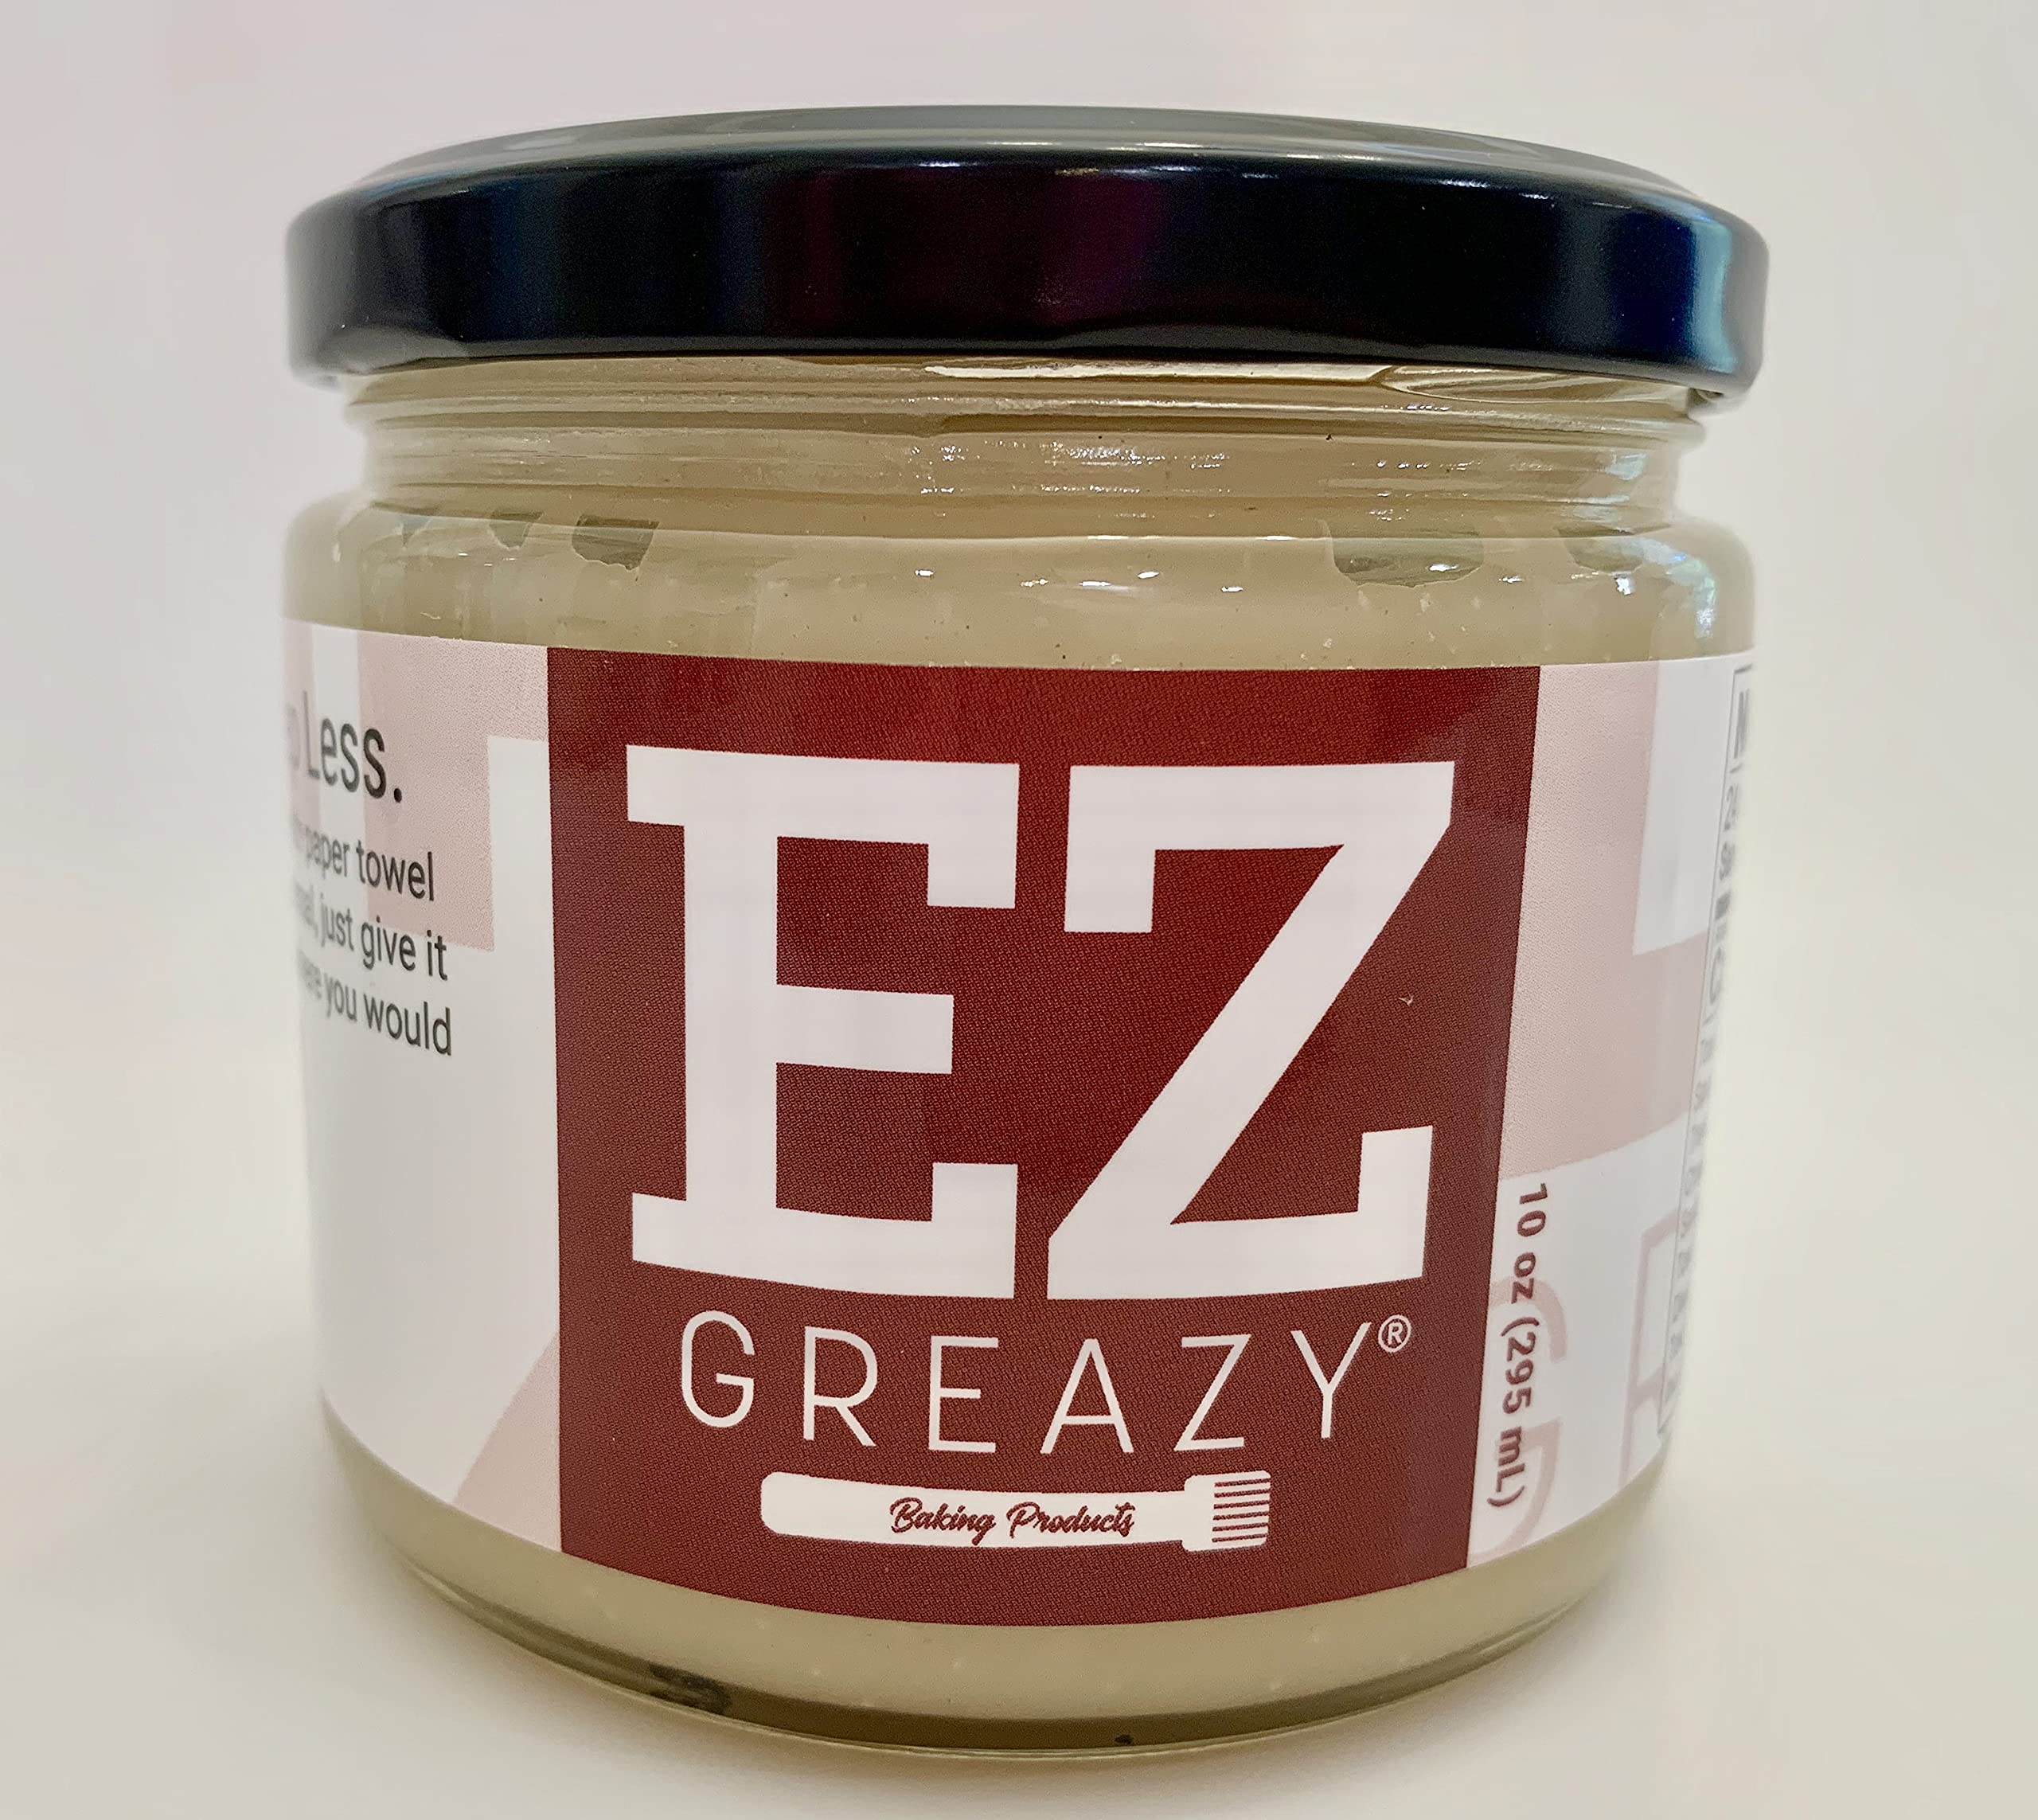 EZ Greazy - Baking Products, Cake Pan Prep., 10 oz container